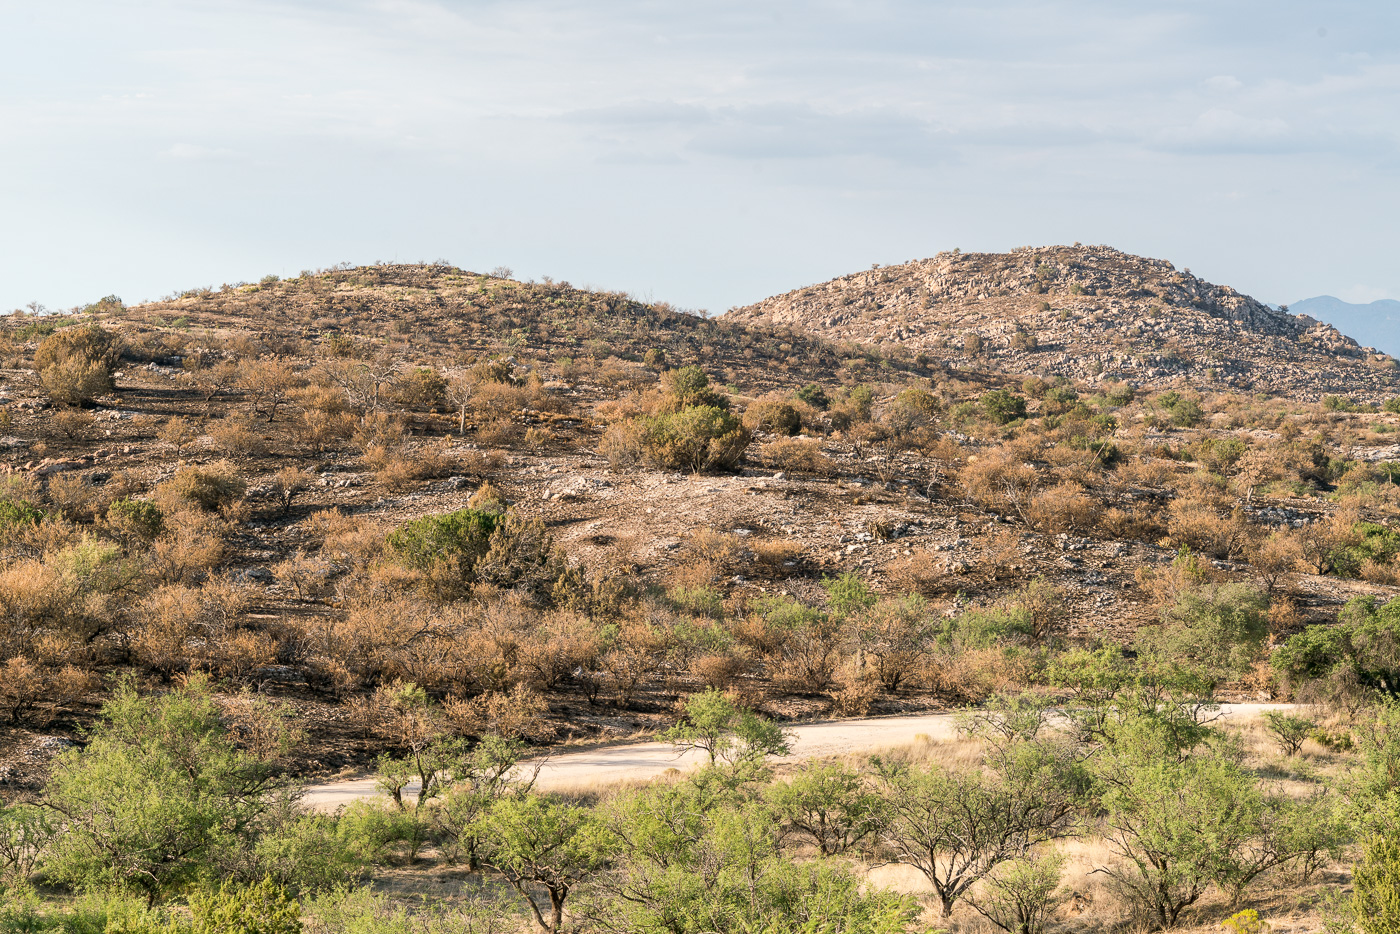 The Burro Fire was stopped at Redington Road and in this view you can see the green vegetation south of the road and burned area north of the road. July 2017.